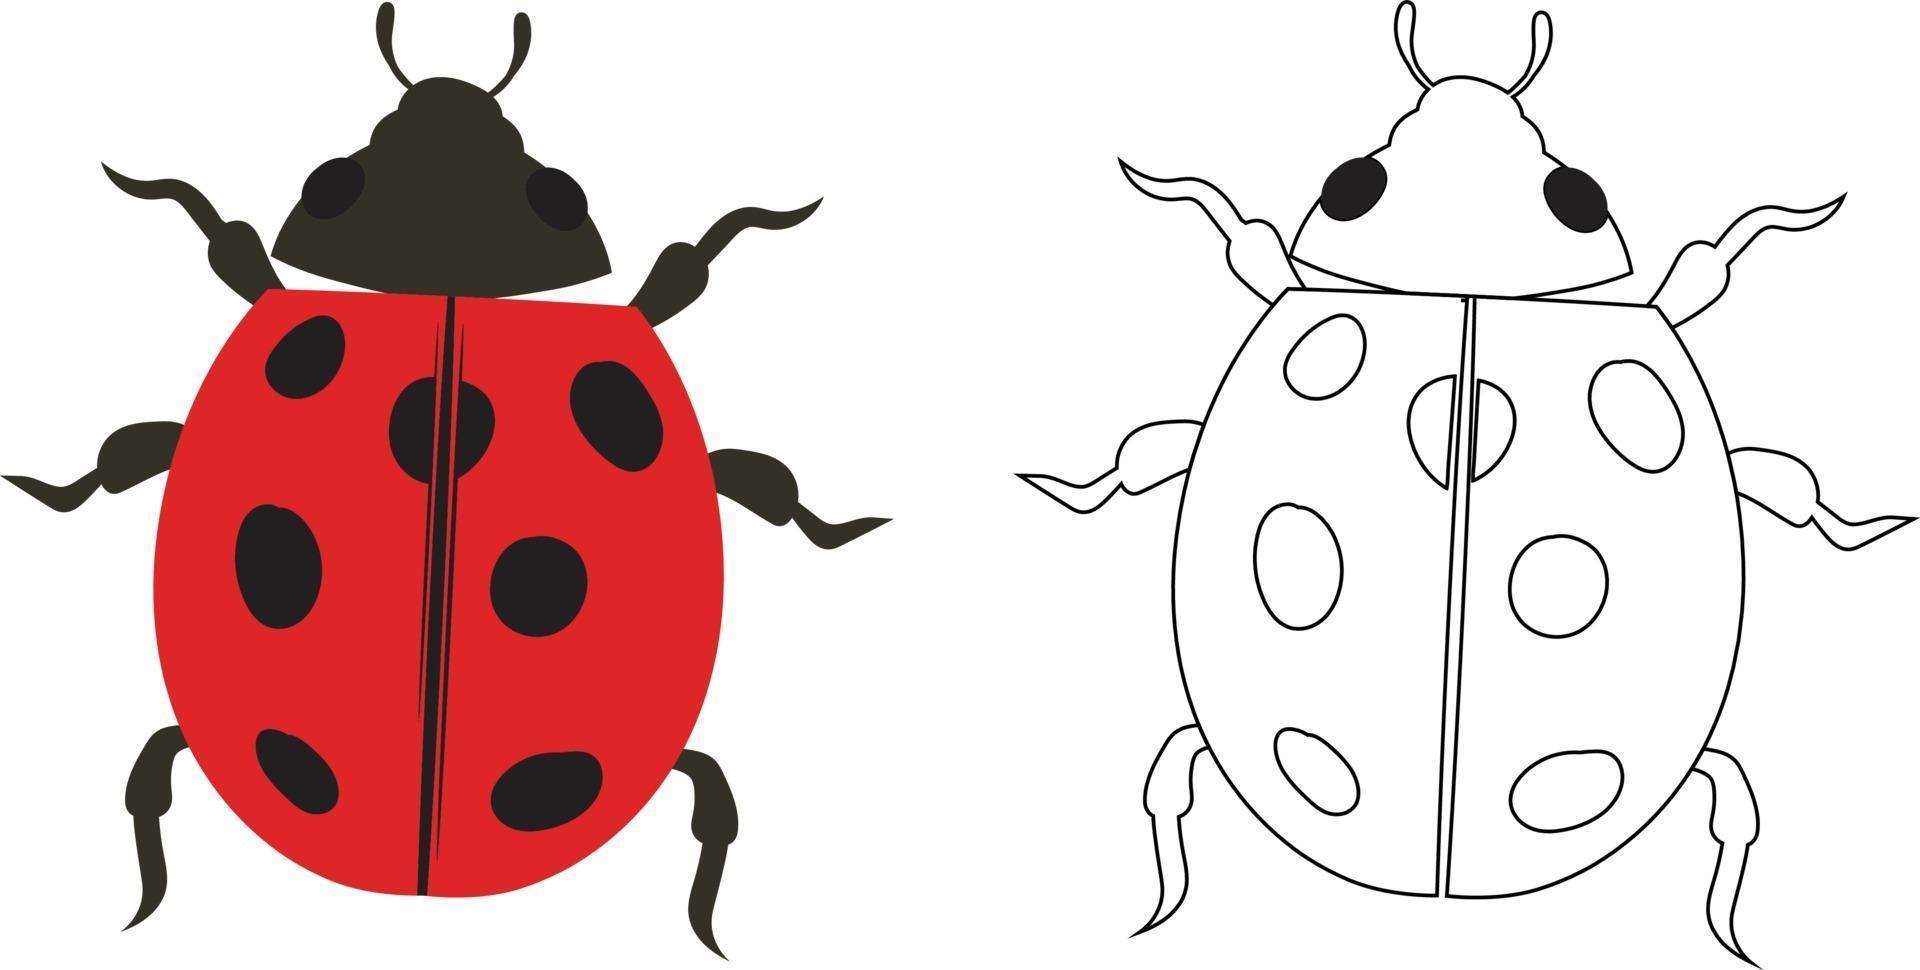 Learn How to Draw a Ladybug (Insects) Step by Step : Drawing Tutorials